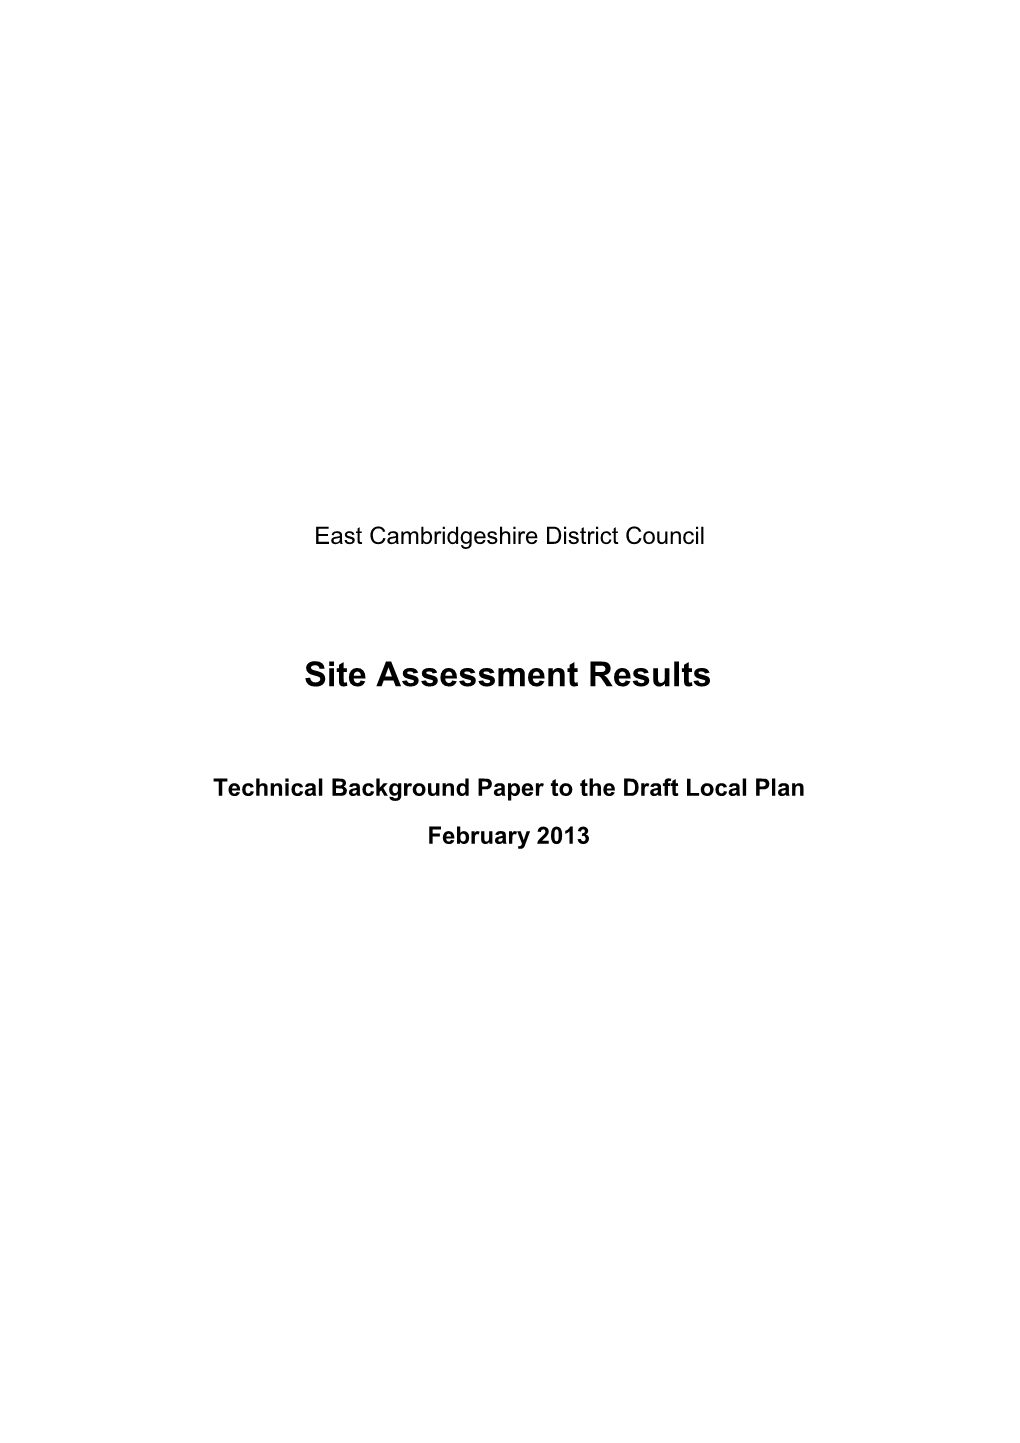 Site Assessment Results